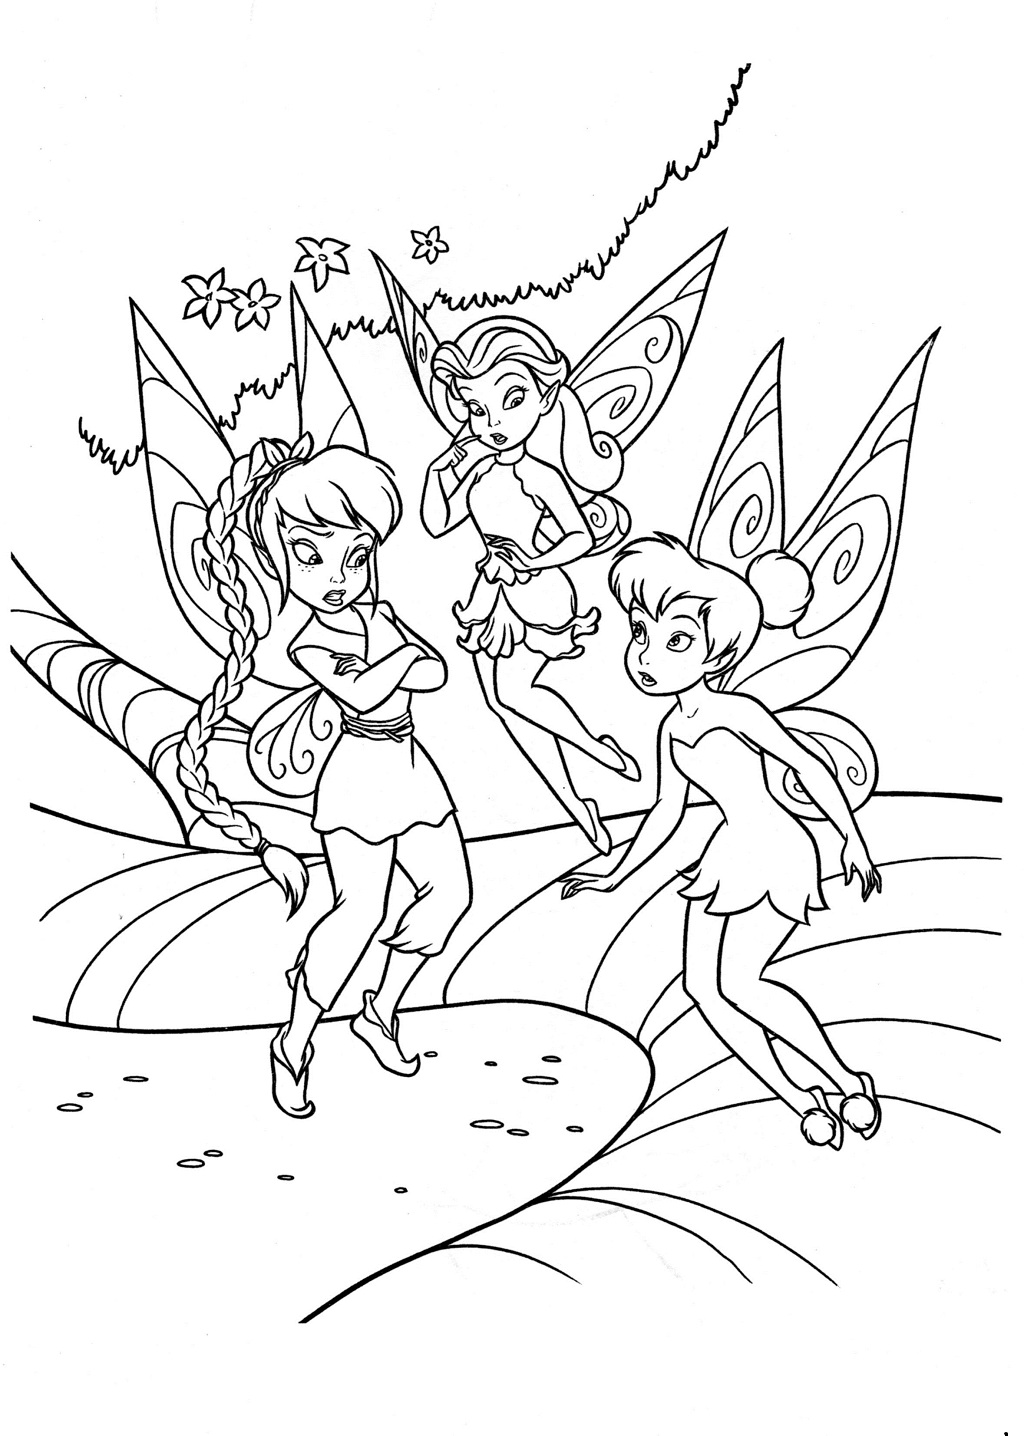 Fairies Coloring Pages (3) Coloring Kids - Coloring Kids